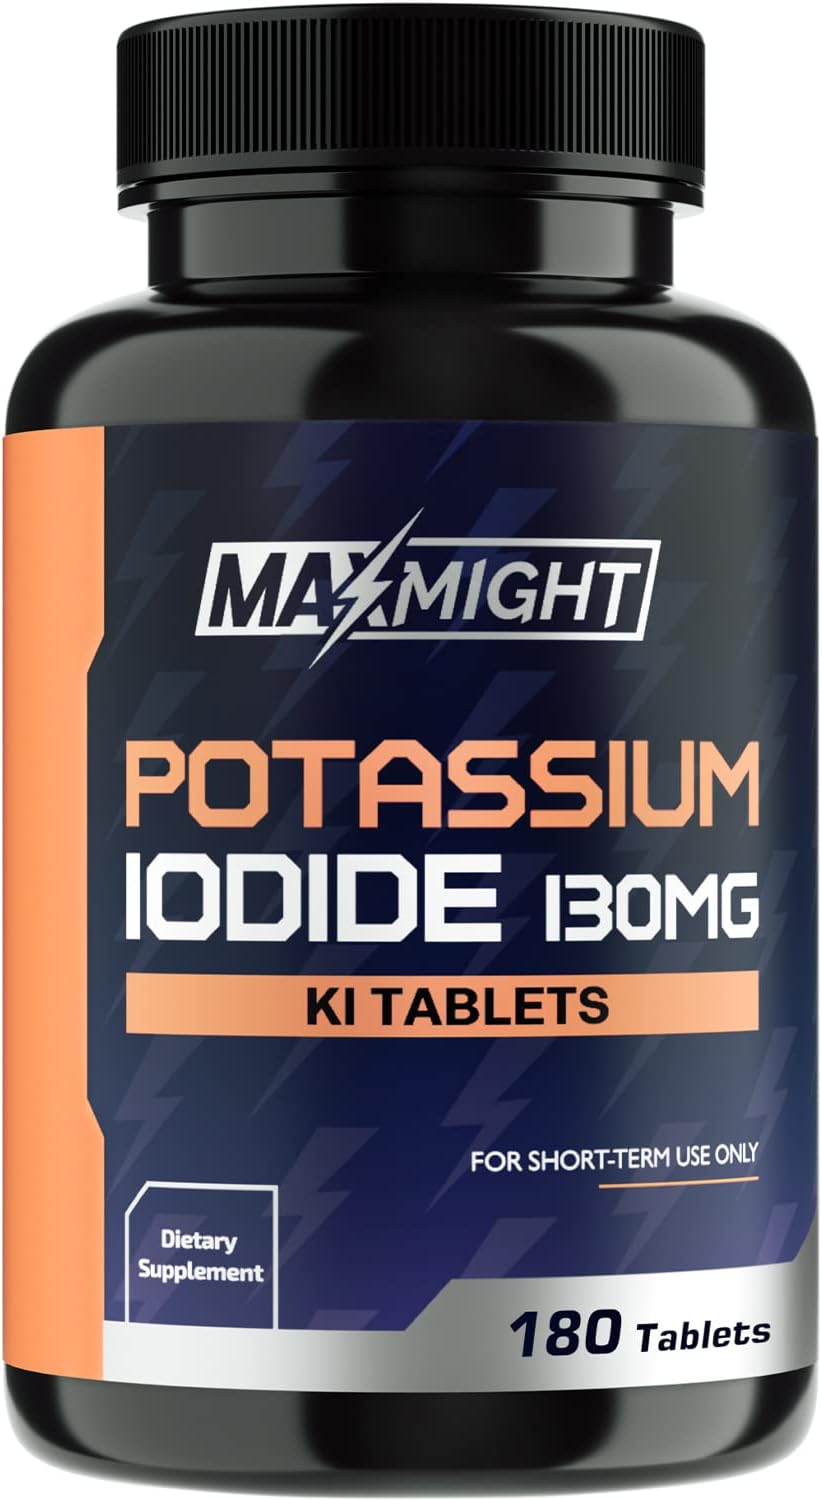 Potassium Iodide 130 Mg, Non-Gmo, Dietary Supplement, 180 Tablets, up to 6 Month Supply, Potassium Iodide Pills, YODO Naciente, Made in the USA